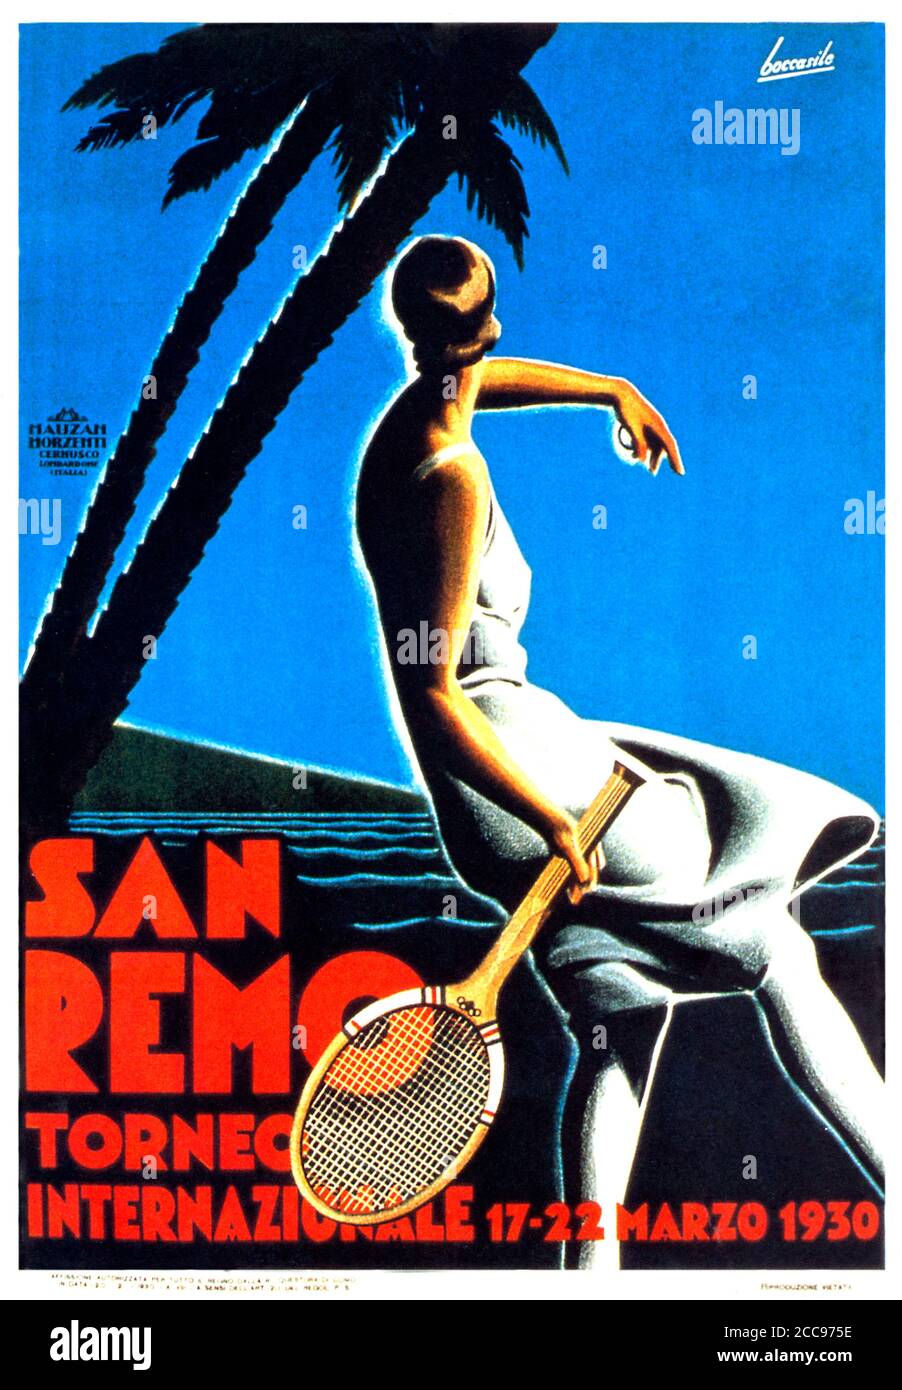 San Remo Tennis, 1930 poster for the International tournament in the resort city on the Italian Riviera Stock Photo